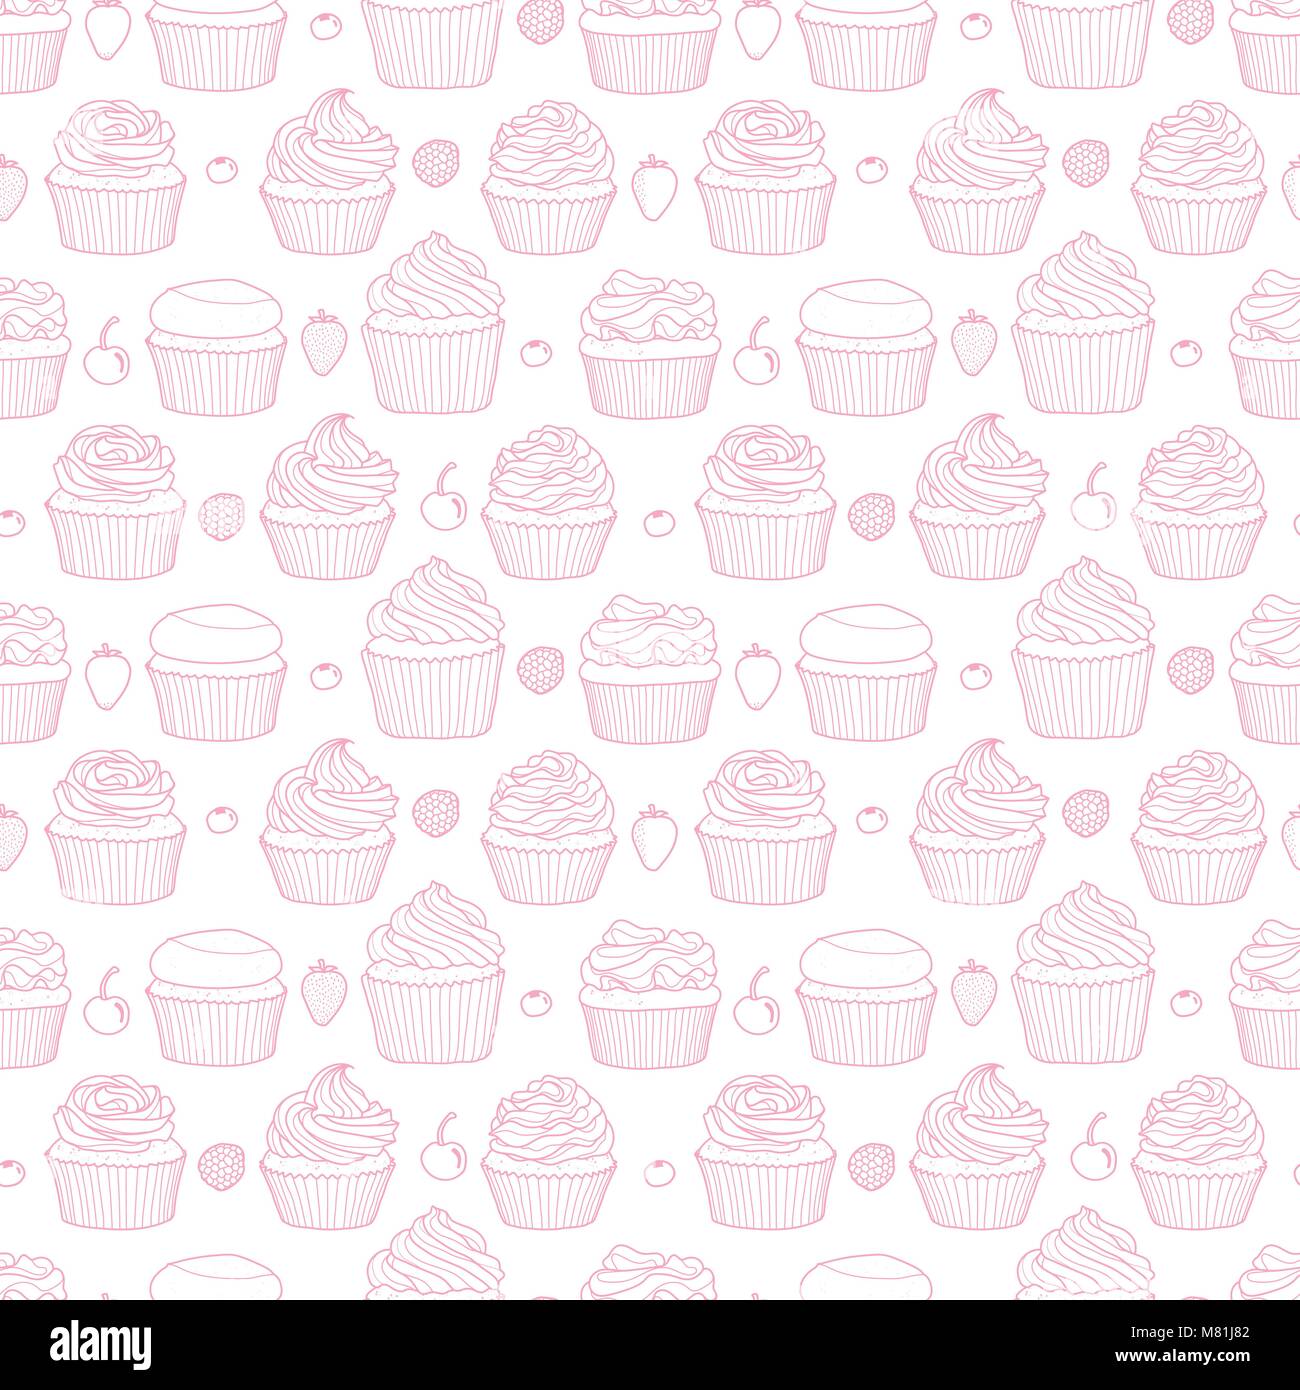 6 styles of cupcake and fruits random on white background. Cute hand drawn seamless pattern of dessert in pastel pink outline. Stock Vector